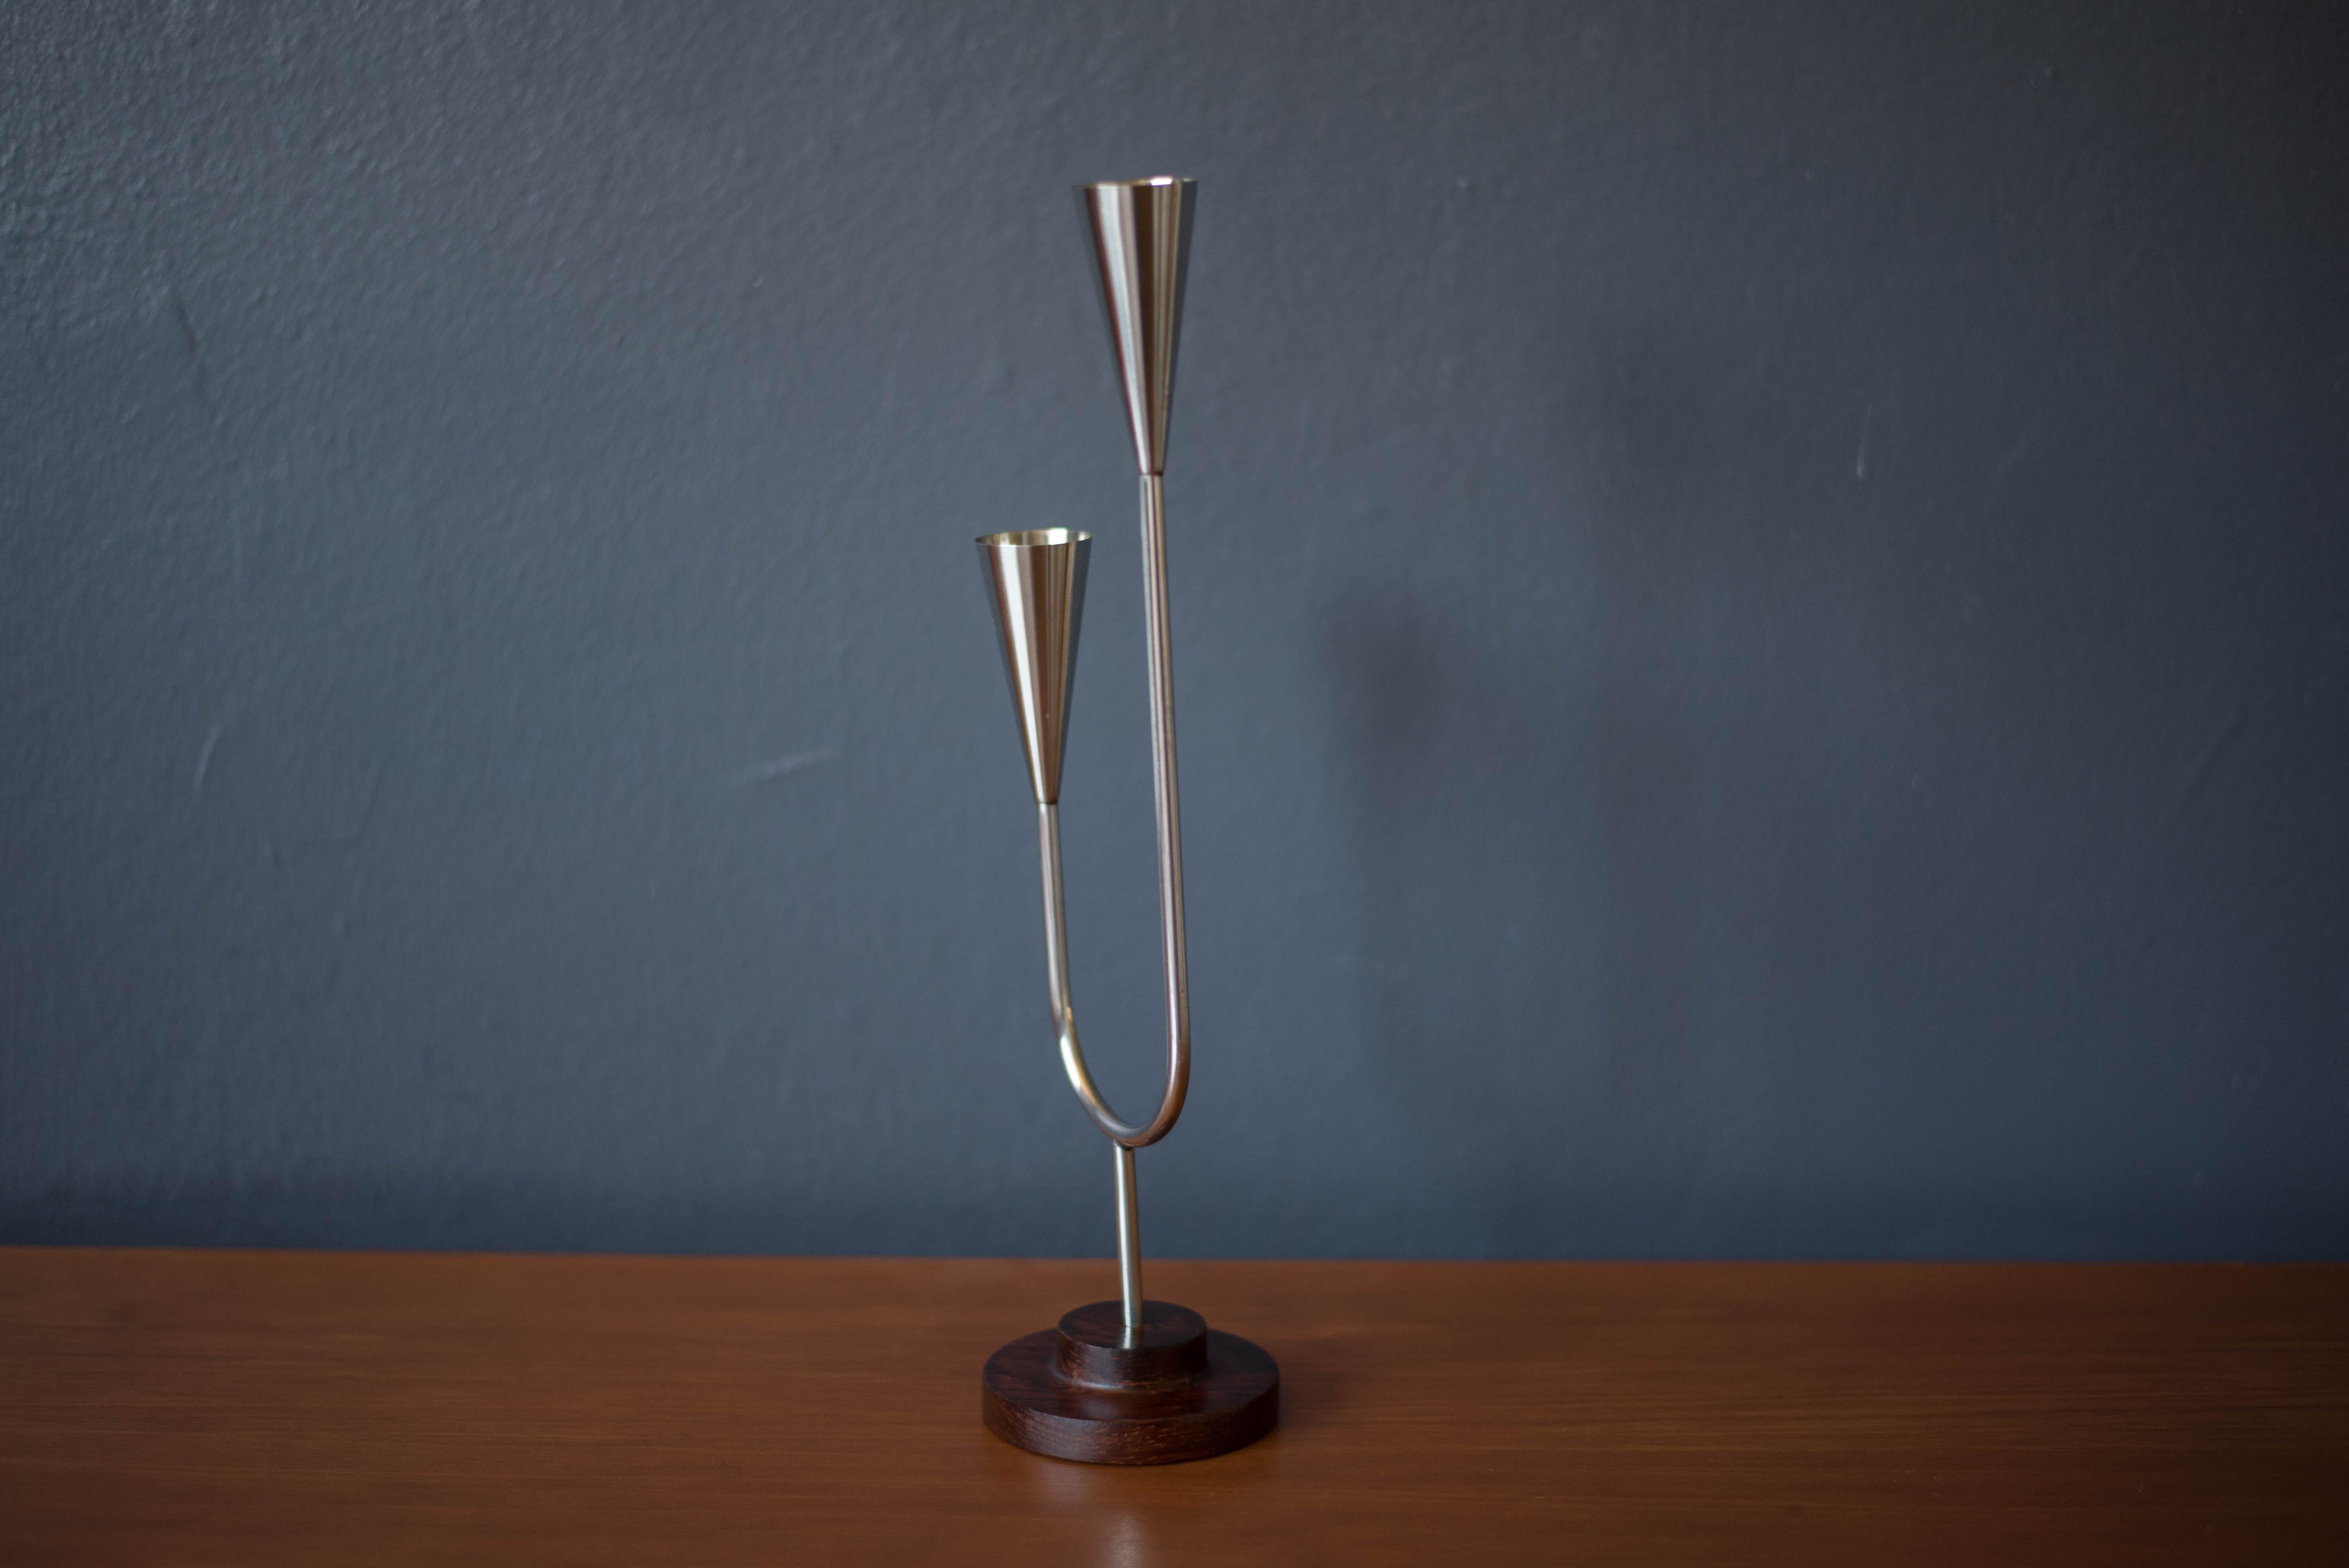 Mid-Century Modern candle holder manufactured by DFK Lundtofte, Denmark, c. 1960's. Features a solid rosewood pedestal base and a polished stainless steel stem that fits two taper candles.